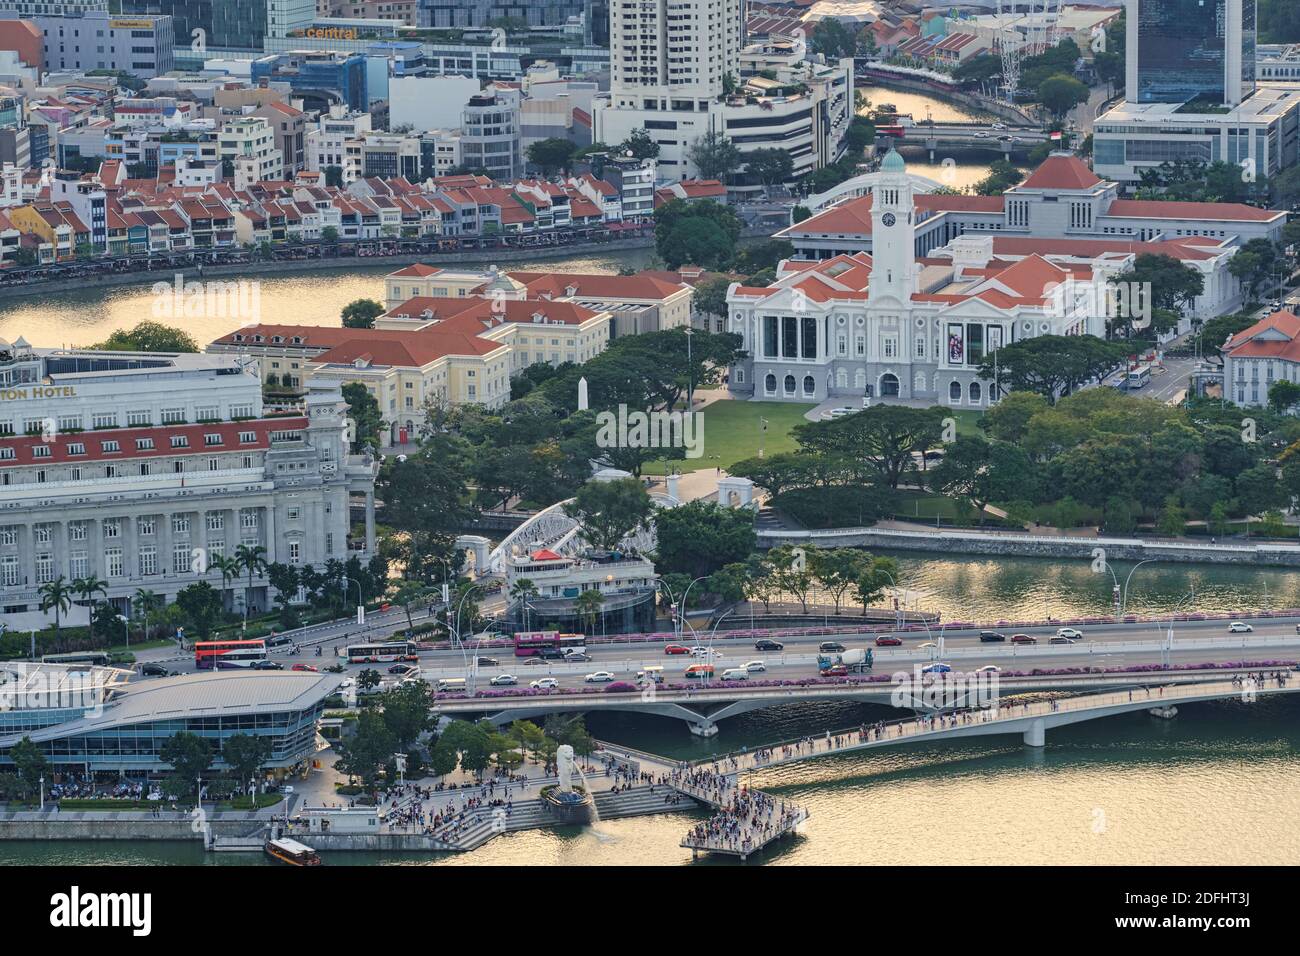 The clocktower of Victoria Memorial Hall & Victoria Theatre, Empress Place, the Singapore River, Boat Quay, Merlion, and other landmarks in Singapore Stock Photo